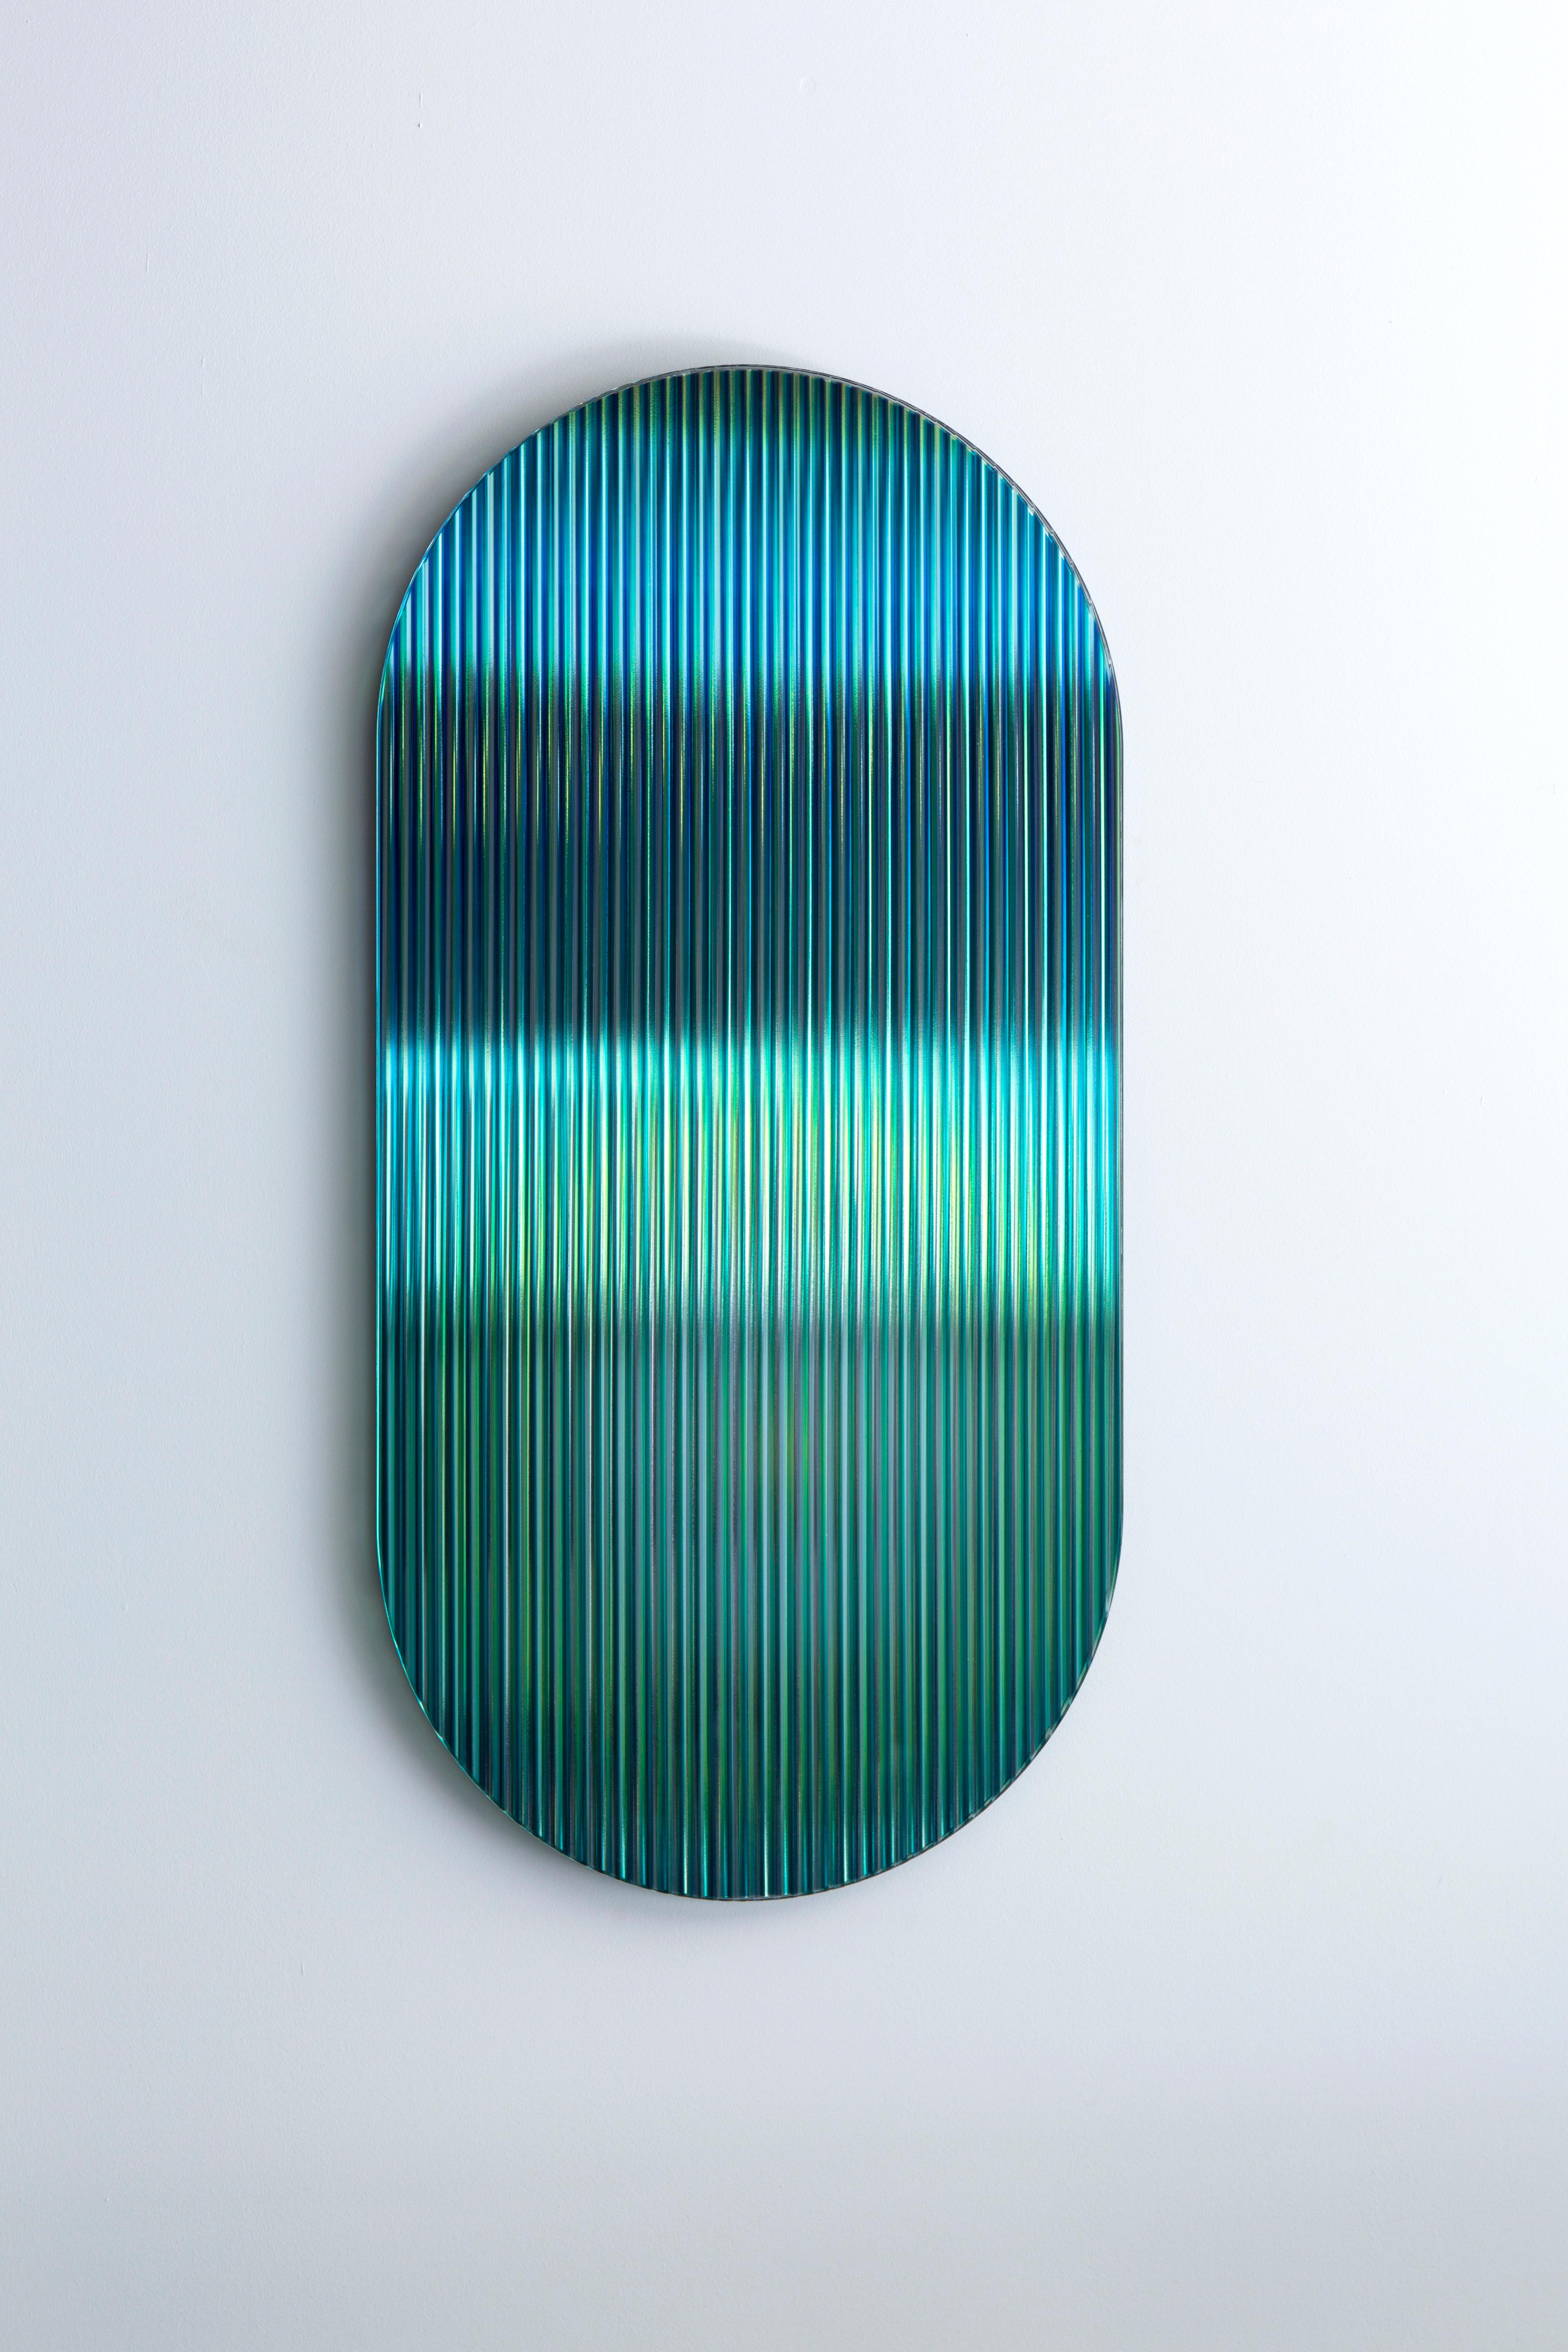 Hand-Crafted Color Shift Panel Trichroic Green with Glass and Mirror, 1stdibs New York For Sale